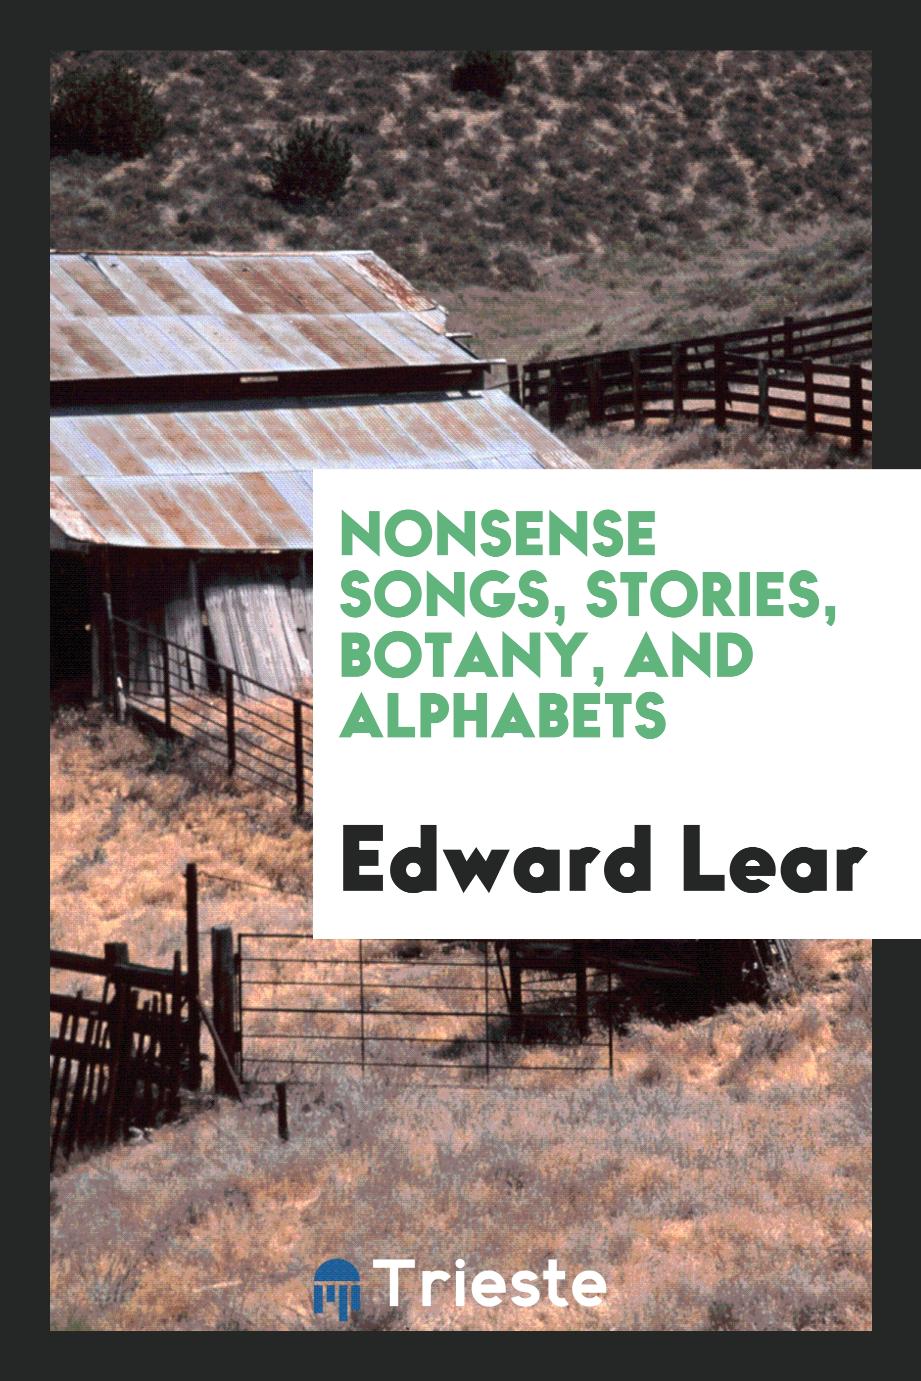 Edward Lear - Nonsense Songs, Stories, Botany, and Alphabets